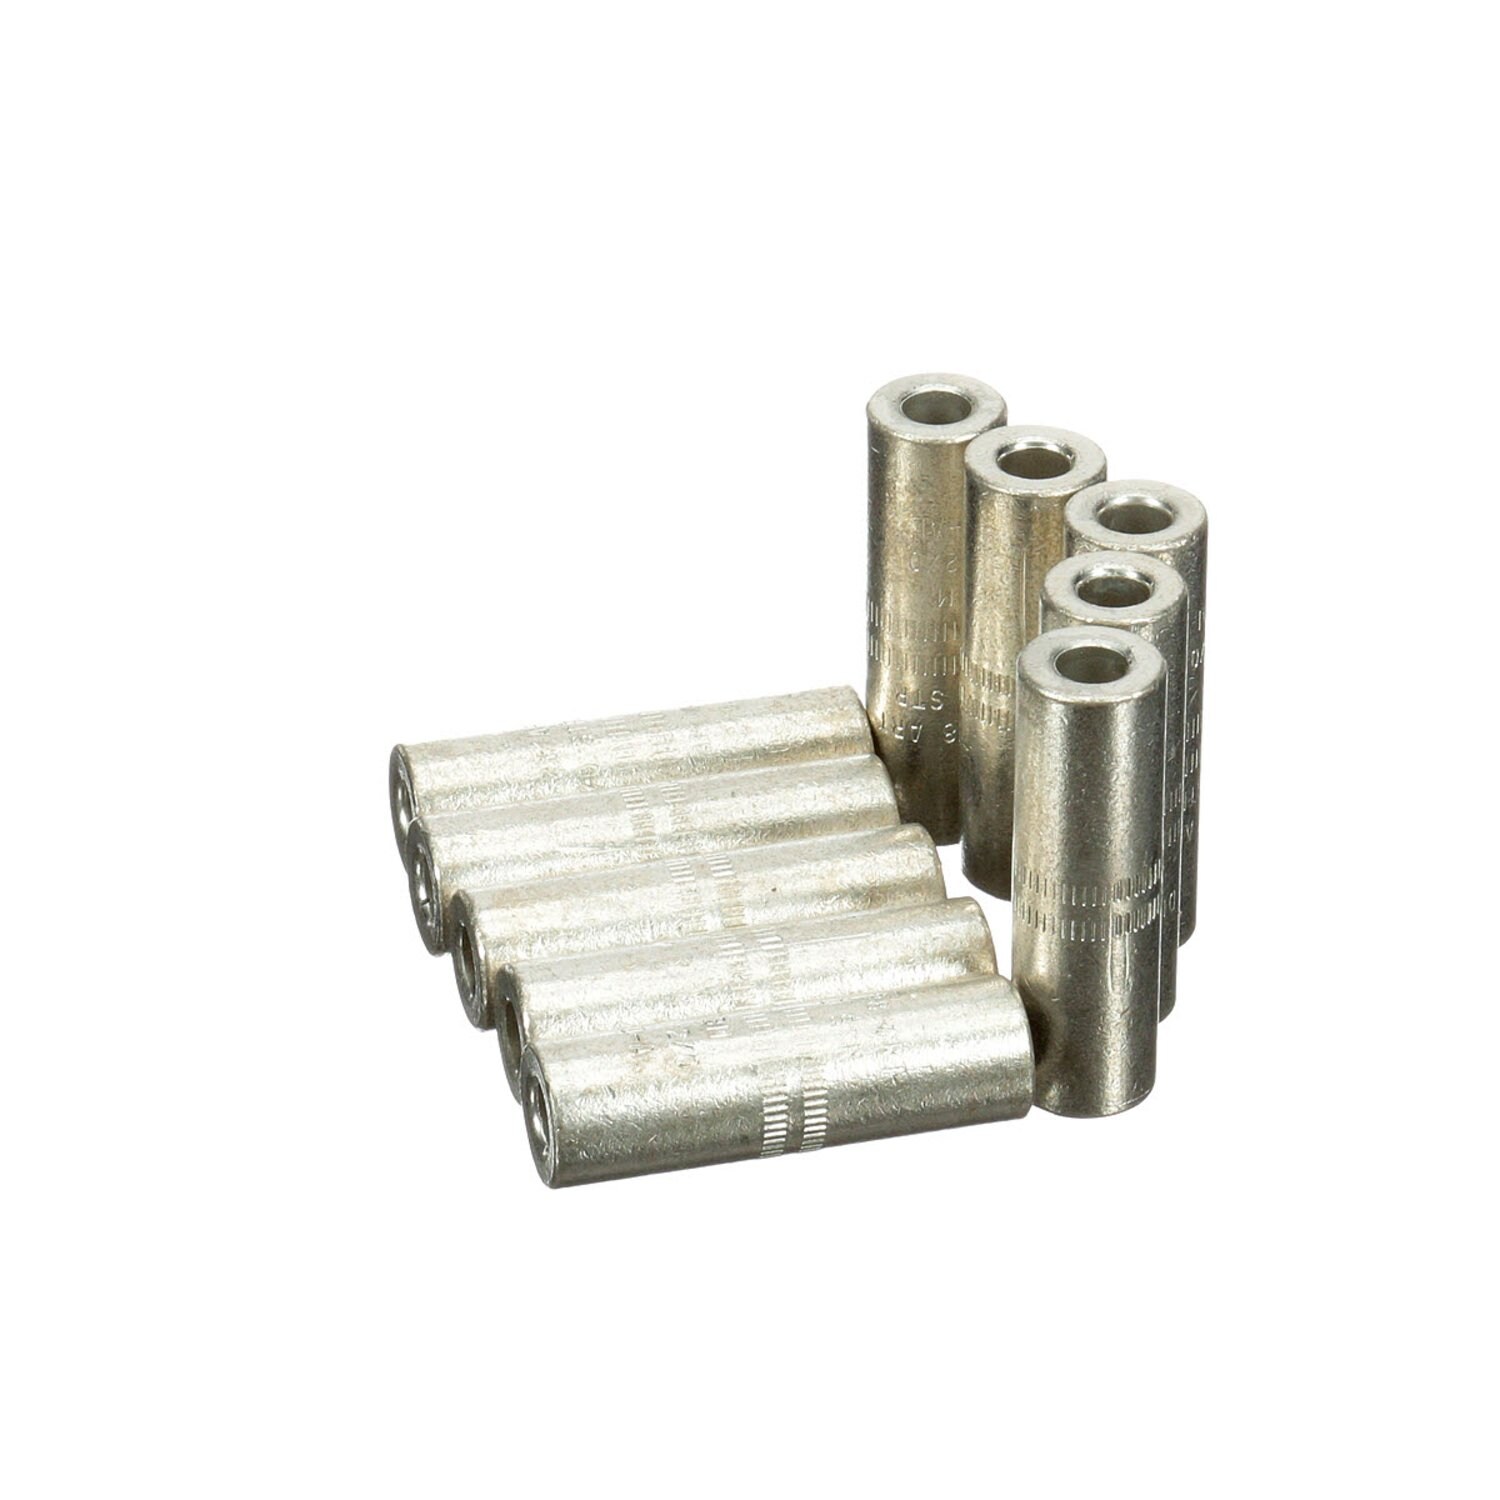 7100163905 - 3M Aluminum Connector CI-650, up to 35 kV, 750 kcmil compact, Connector
O.D. 1.700 in (43,0 mm), Compact/Solid; Stranded, 10/Case